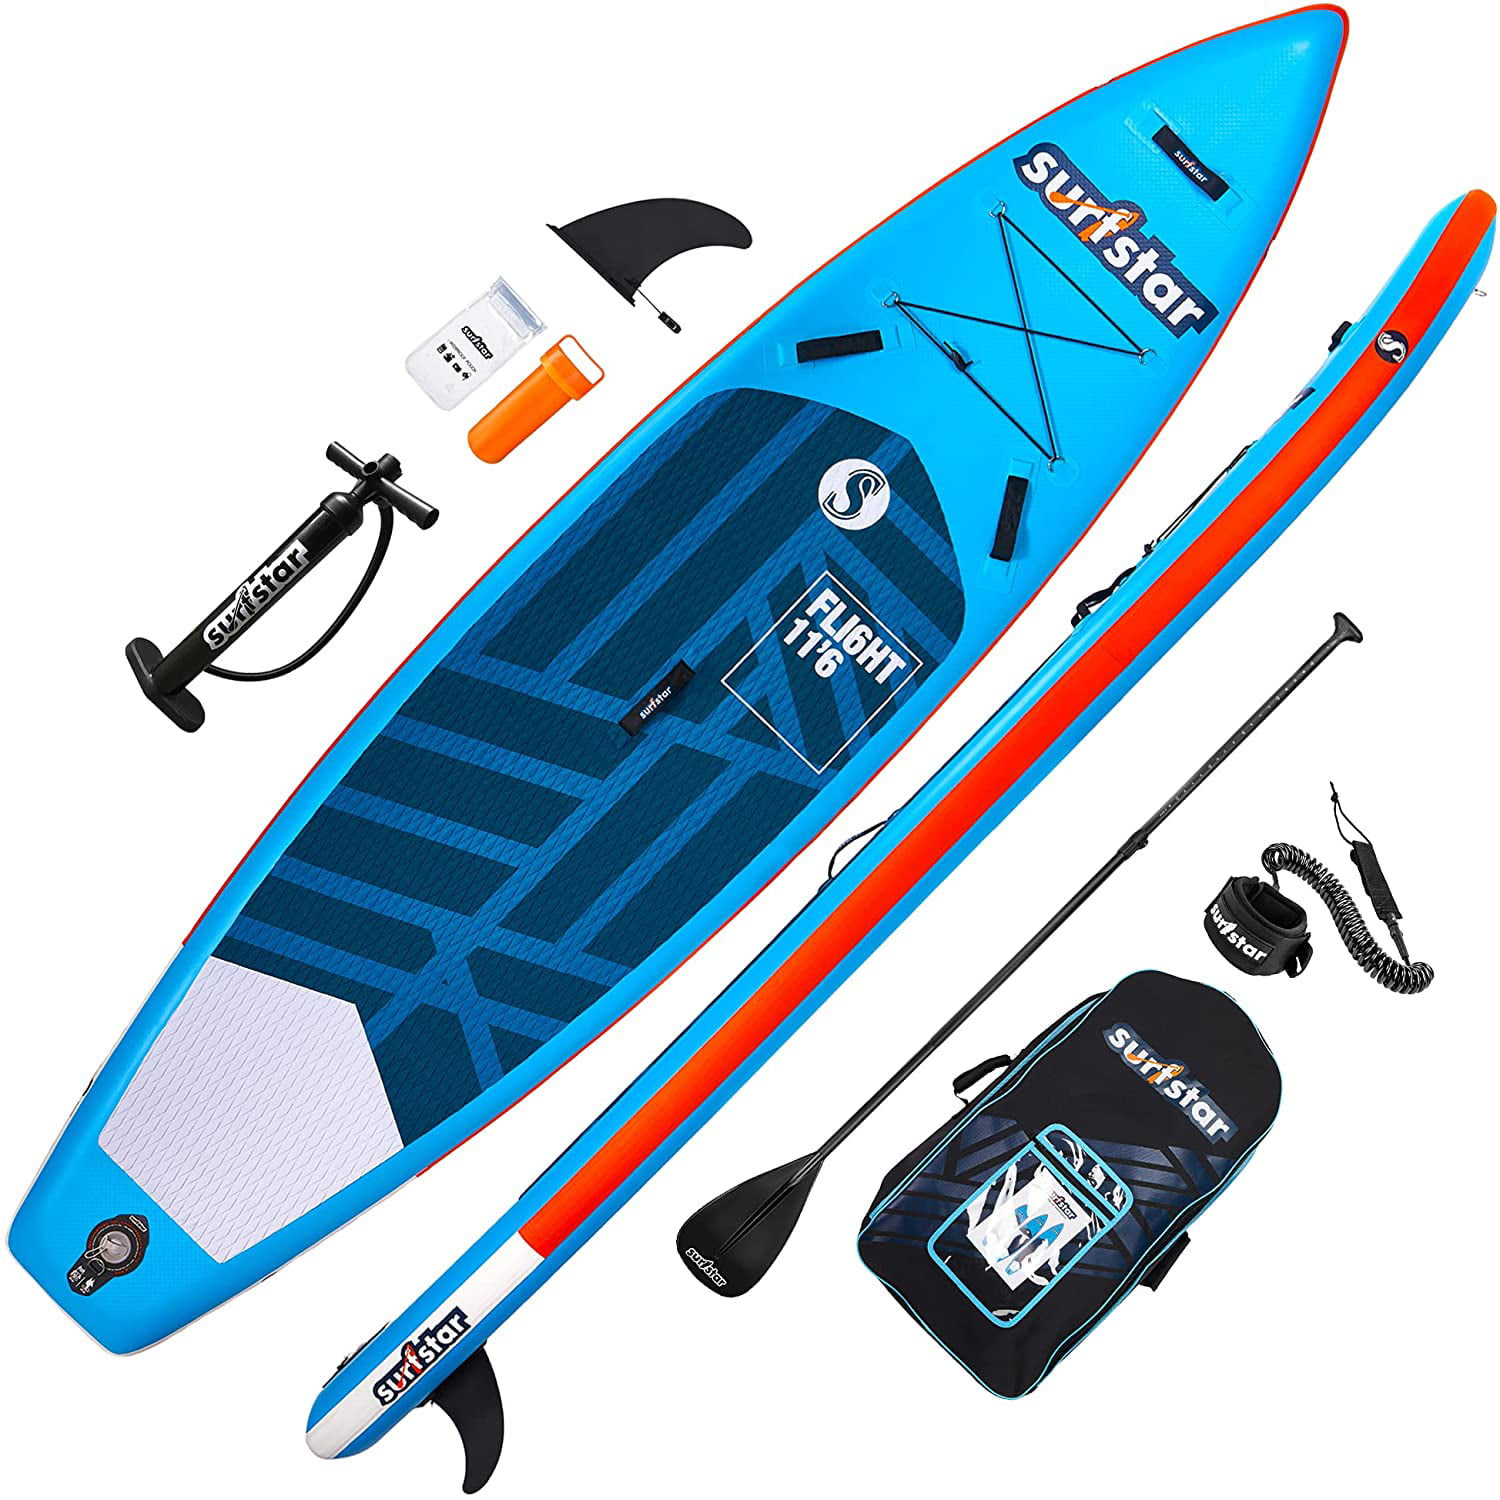 INTEY Inflatable Stand Up Paddle Board Three Fins for Excellent Tracking 10.6ft Durable Standing Boat with Great SUP Accessories & Backpack 6 Inches Thick Surf Control Non-Slip Deck 